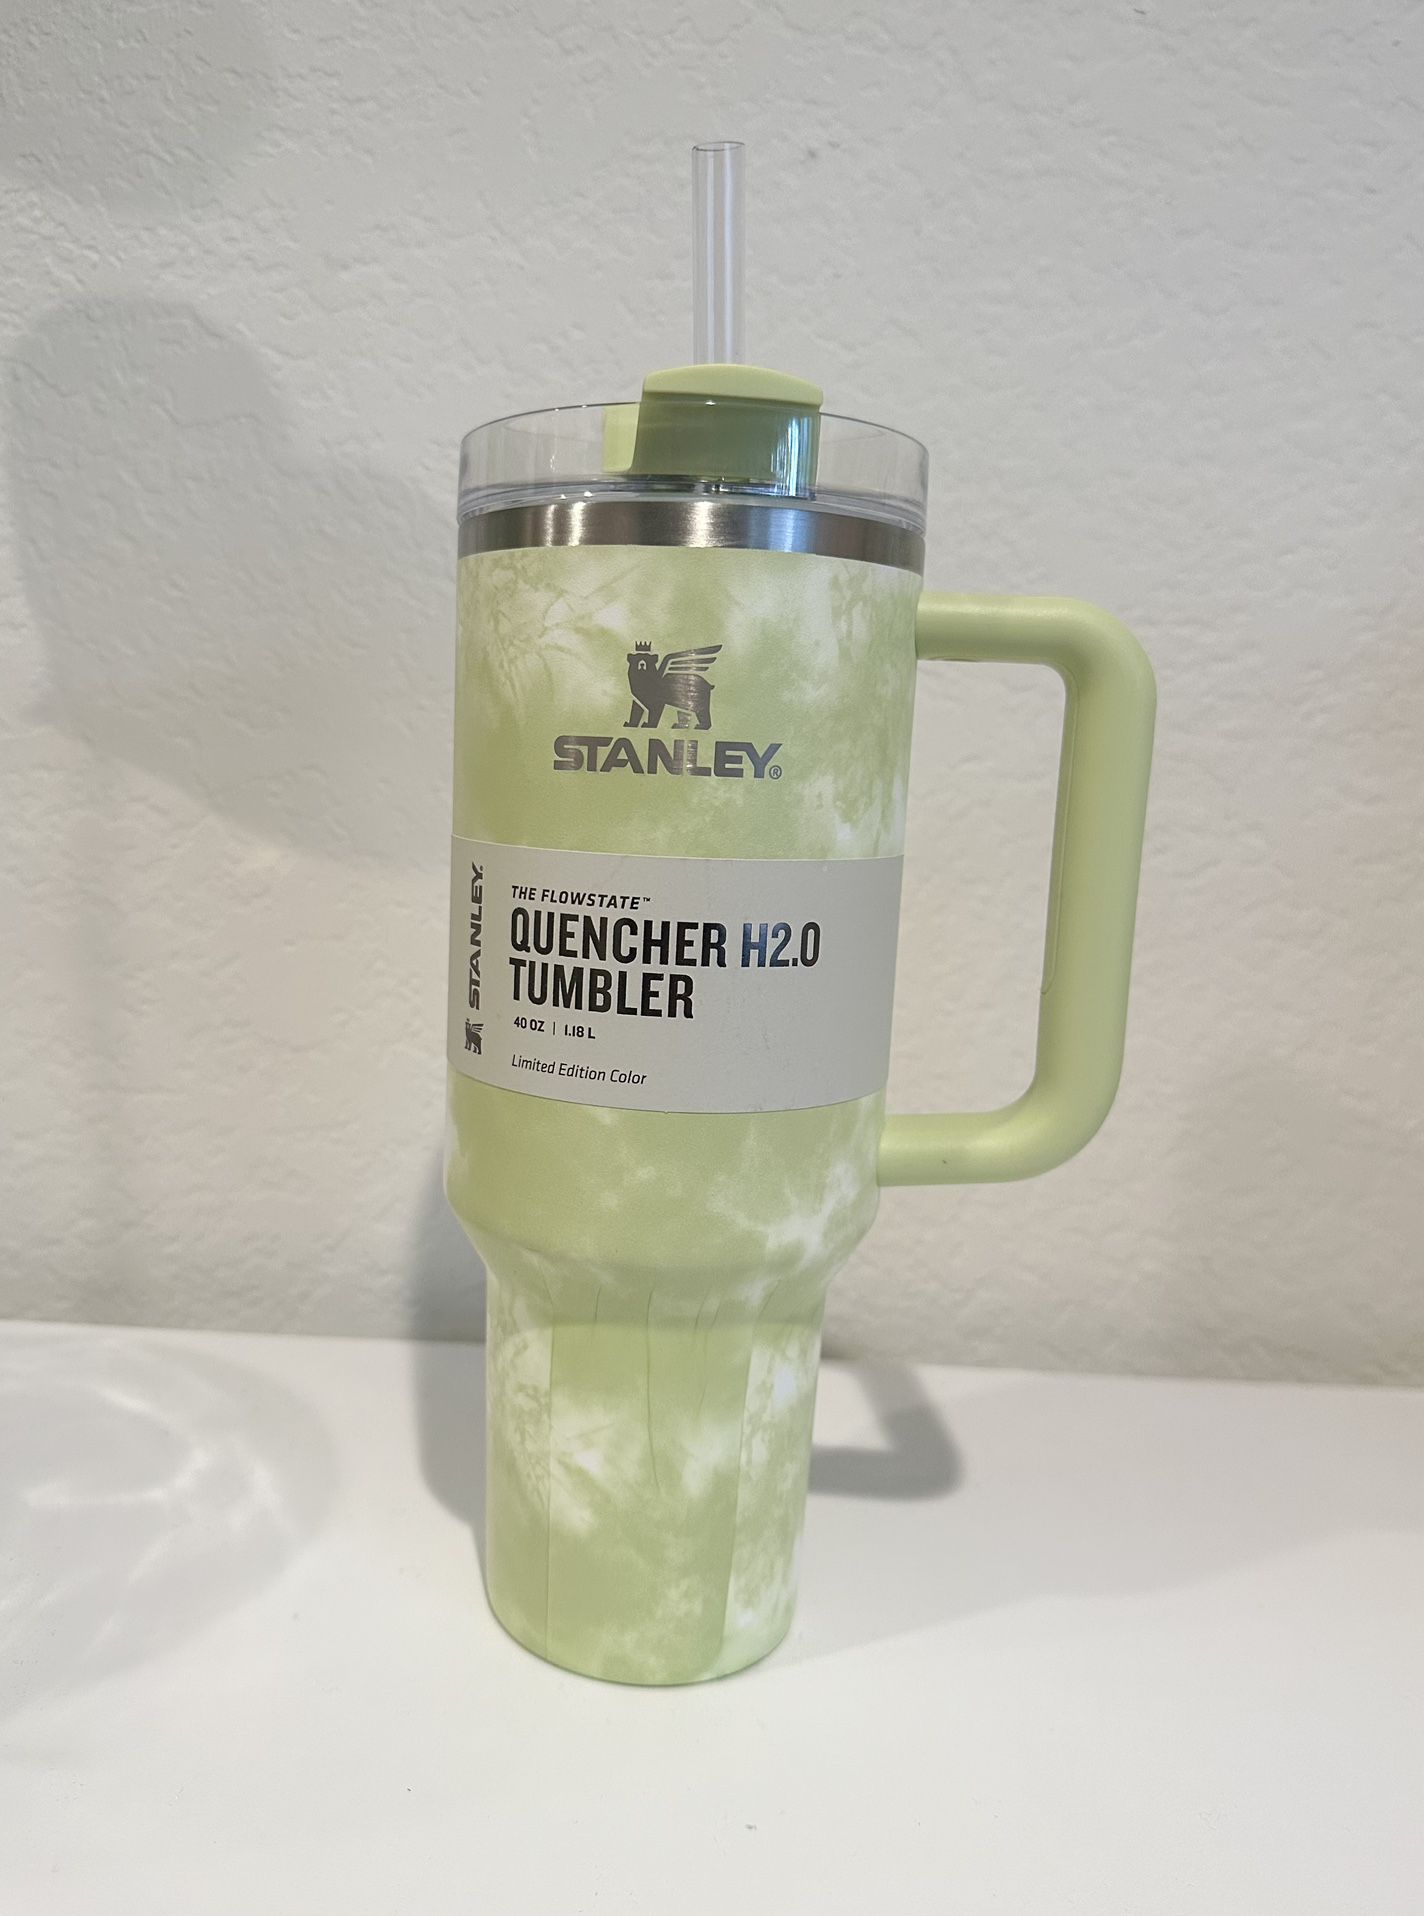 Tie Die Lime Green STANLEY Flowstate Quencher H2.0 Tumbler Cup 40